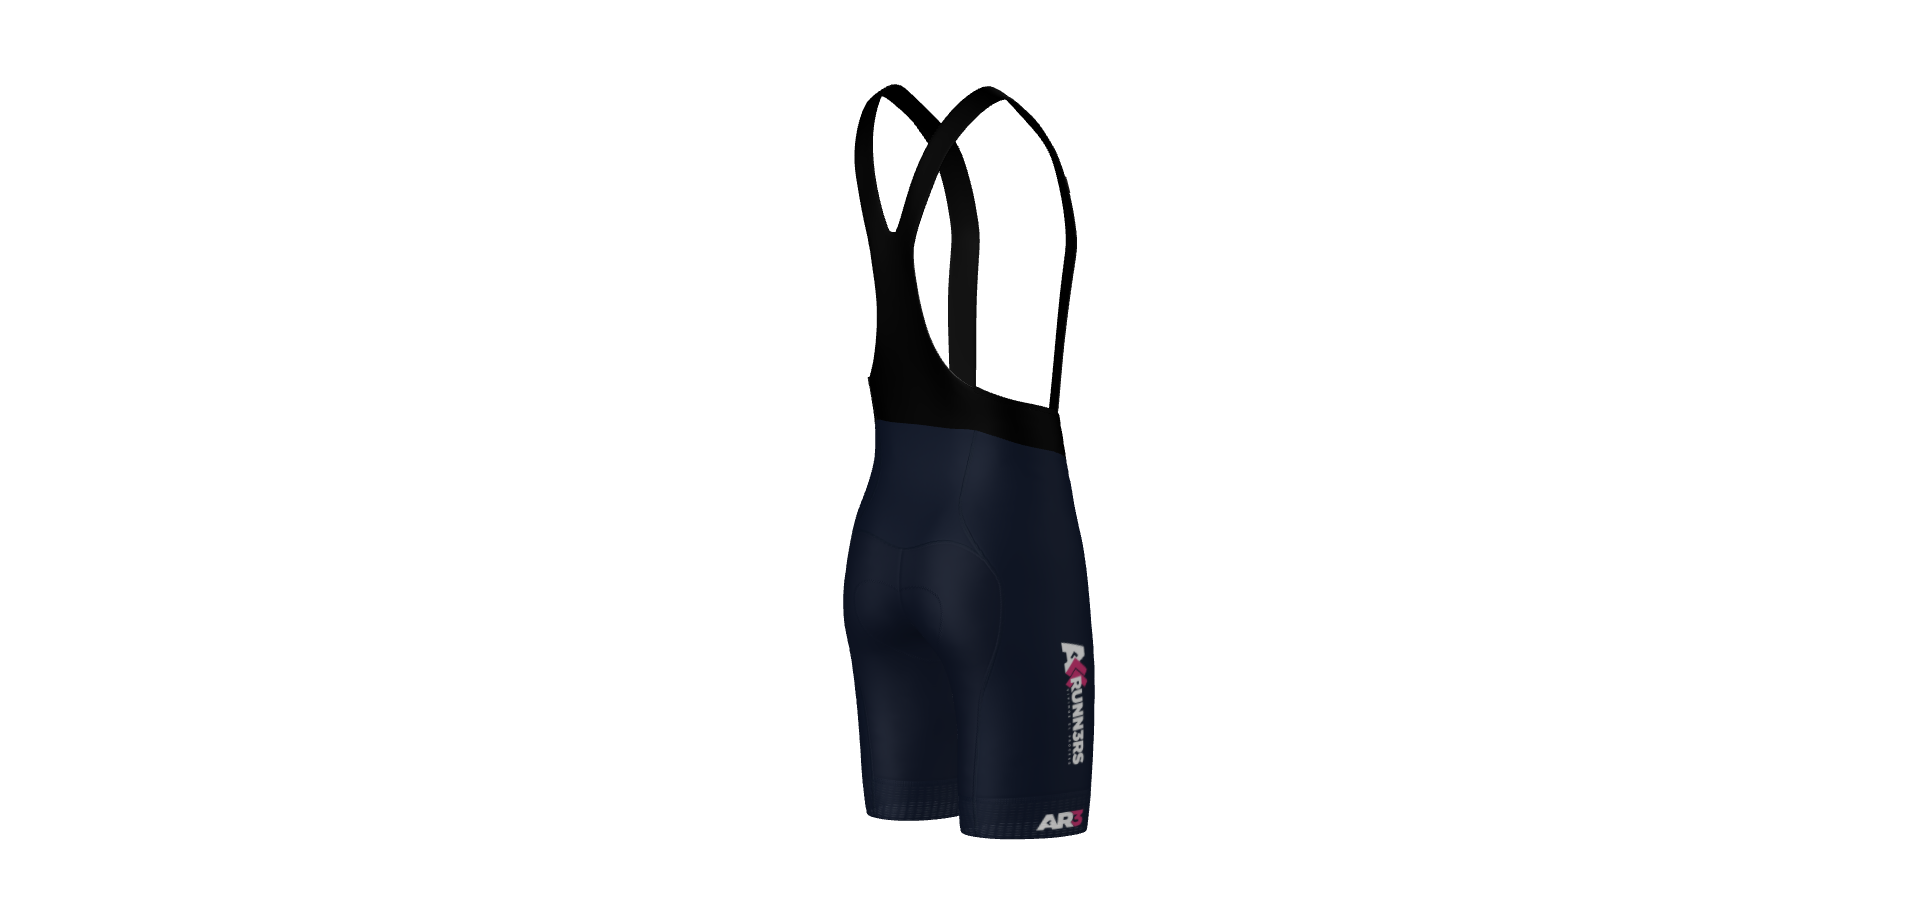 TEAM ALL3RUNNERS CULOTTE CORTO HOMBRE K10 LIMITED 5.0